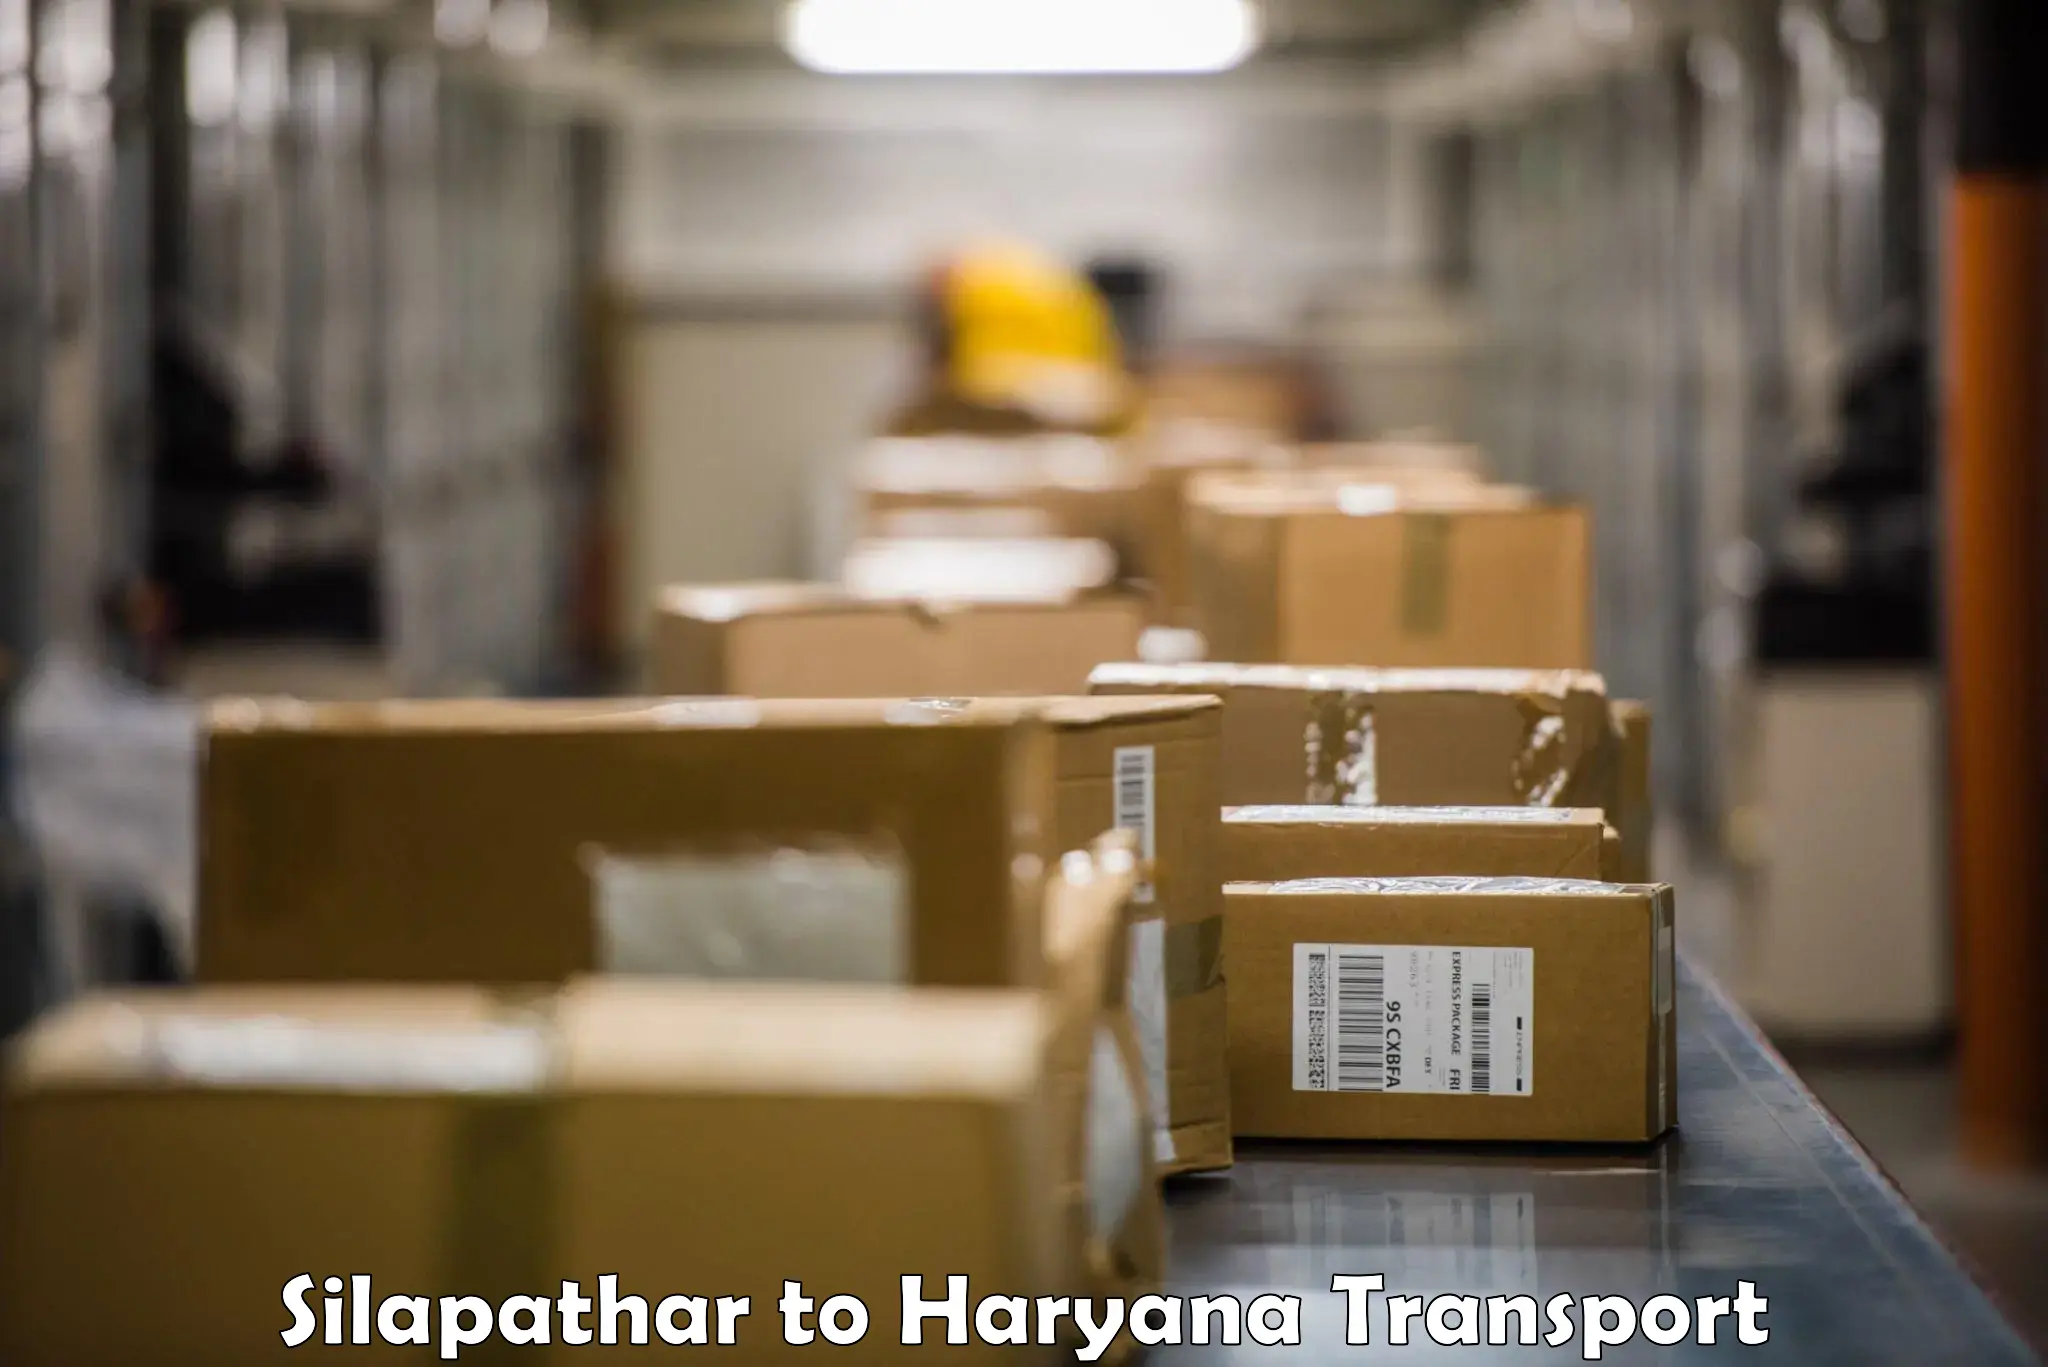 Truck transport companies in India Silapathar to Charkhi Dadri